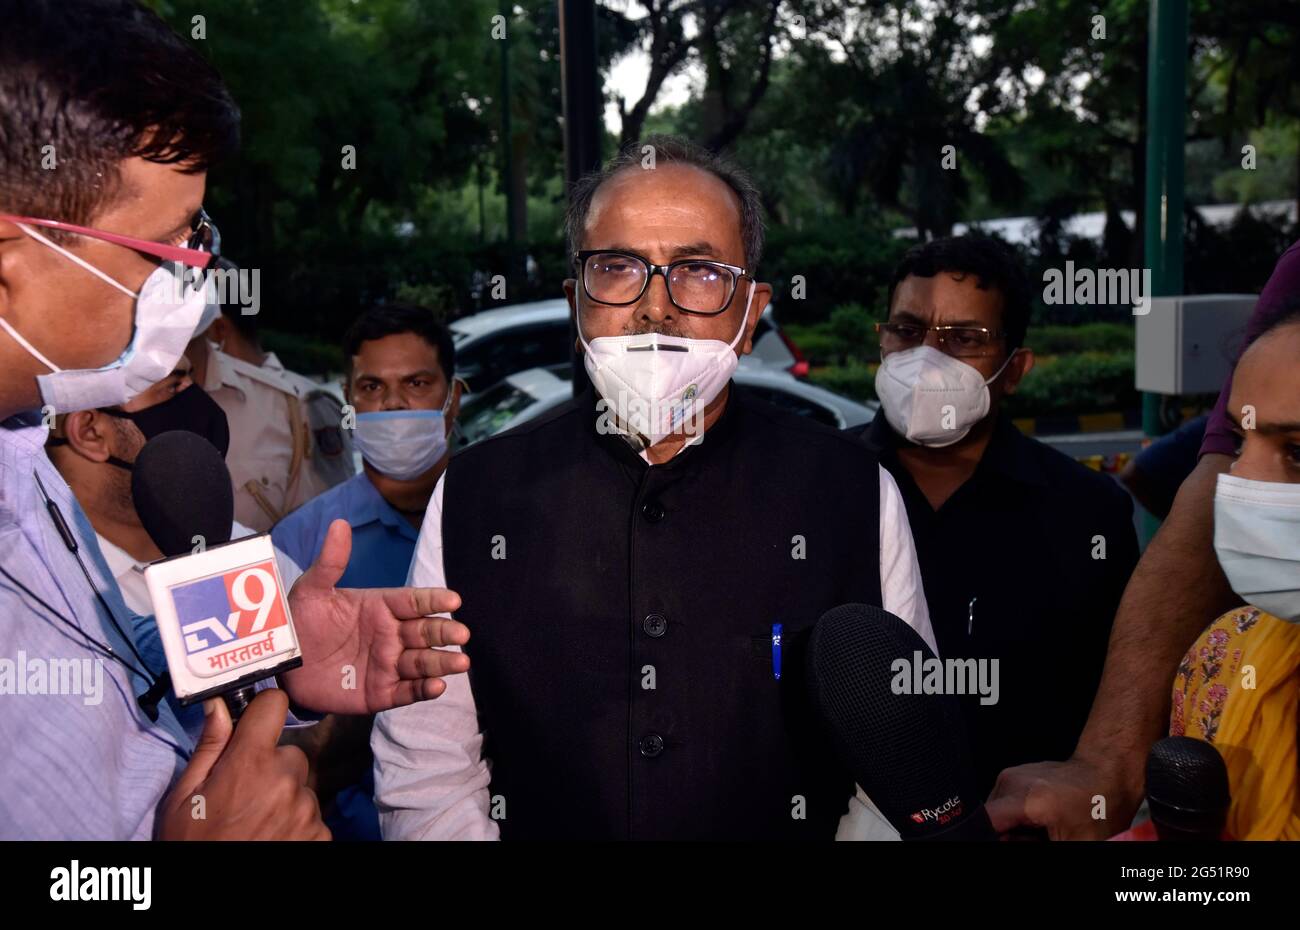 NEW DELHI, INDIA - JUNE 24: Former Deputy CM J&K and BJP Leader Nirmal Singh speaks to media outside PM House after meeting of Prime Minister Narendra Modi with the leaders of Jammu and Kashmir on June 24, 2021 in New Delhi, India. This is the first high level interaction to be held between the central government and Kashmir's political leadership since 2019, when the former scrapped Article 370 and 35A, which gave special status to J-K and its people. Aftter around three-hour-long talks with Jammu and Kashmir political leaders, Prime Minister Narendra Modi said delimitation has to happen at q Stock Photo